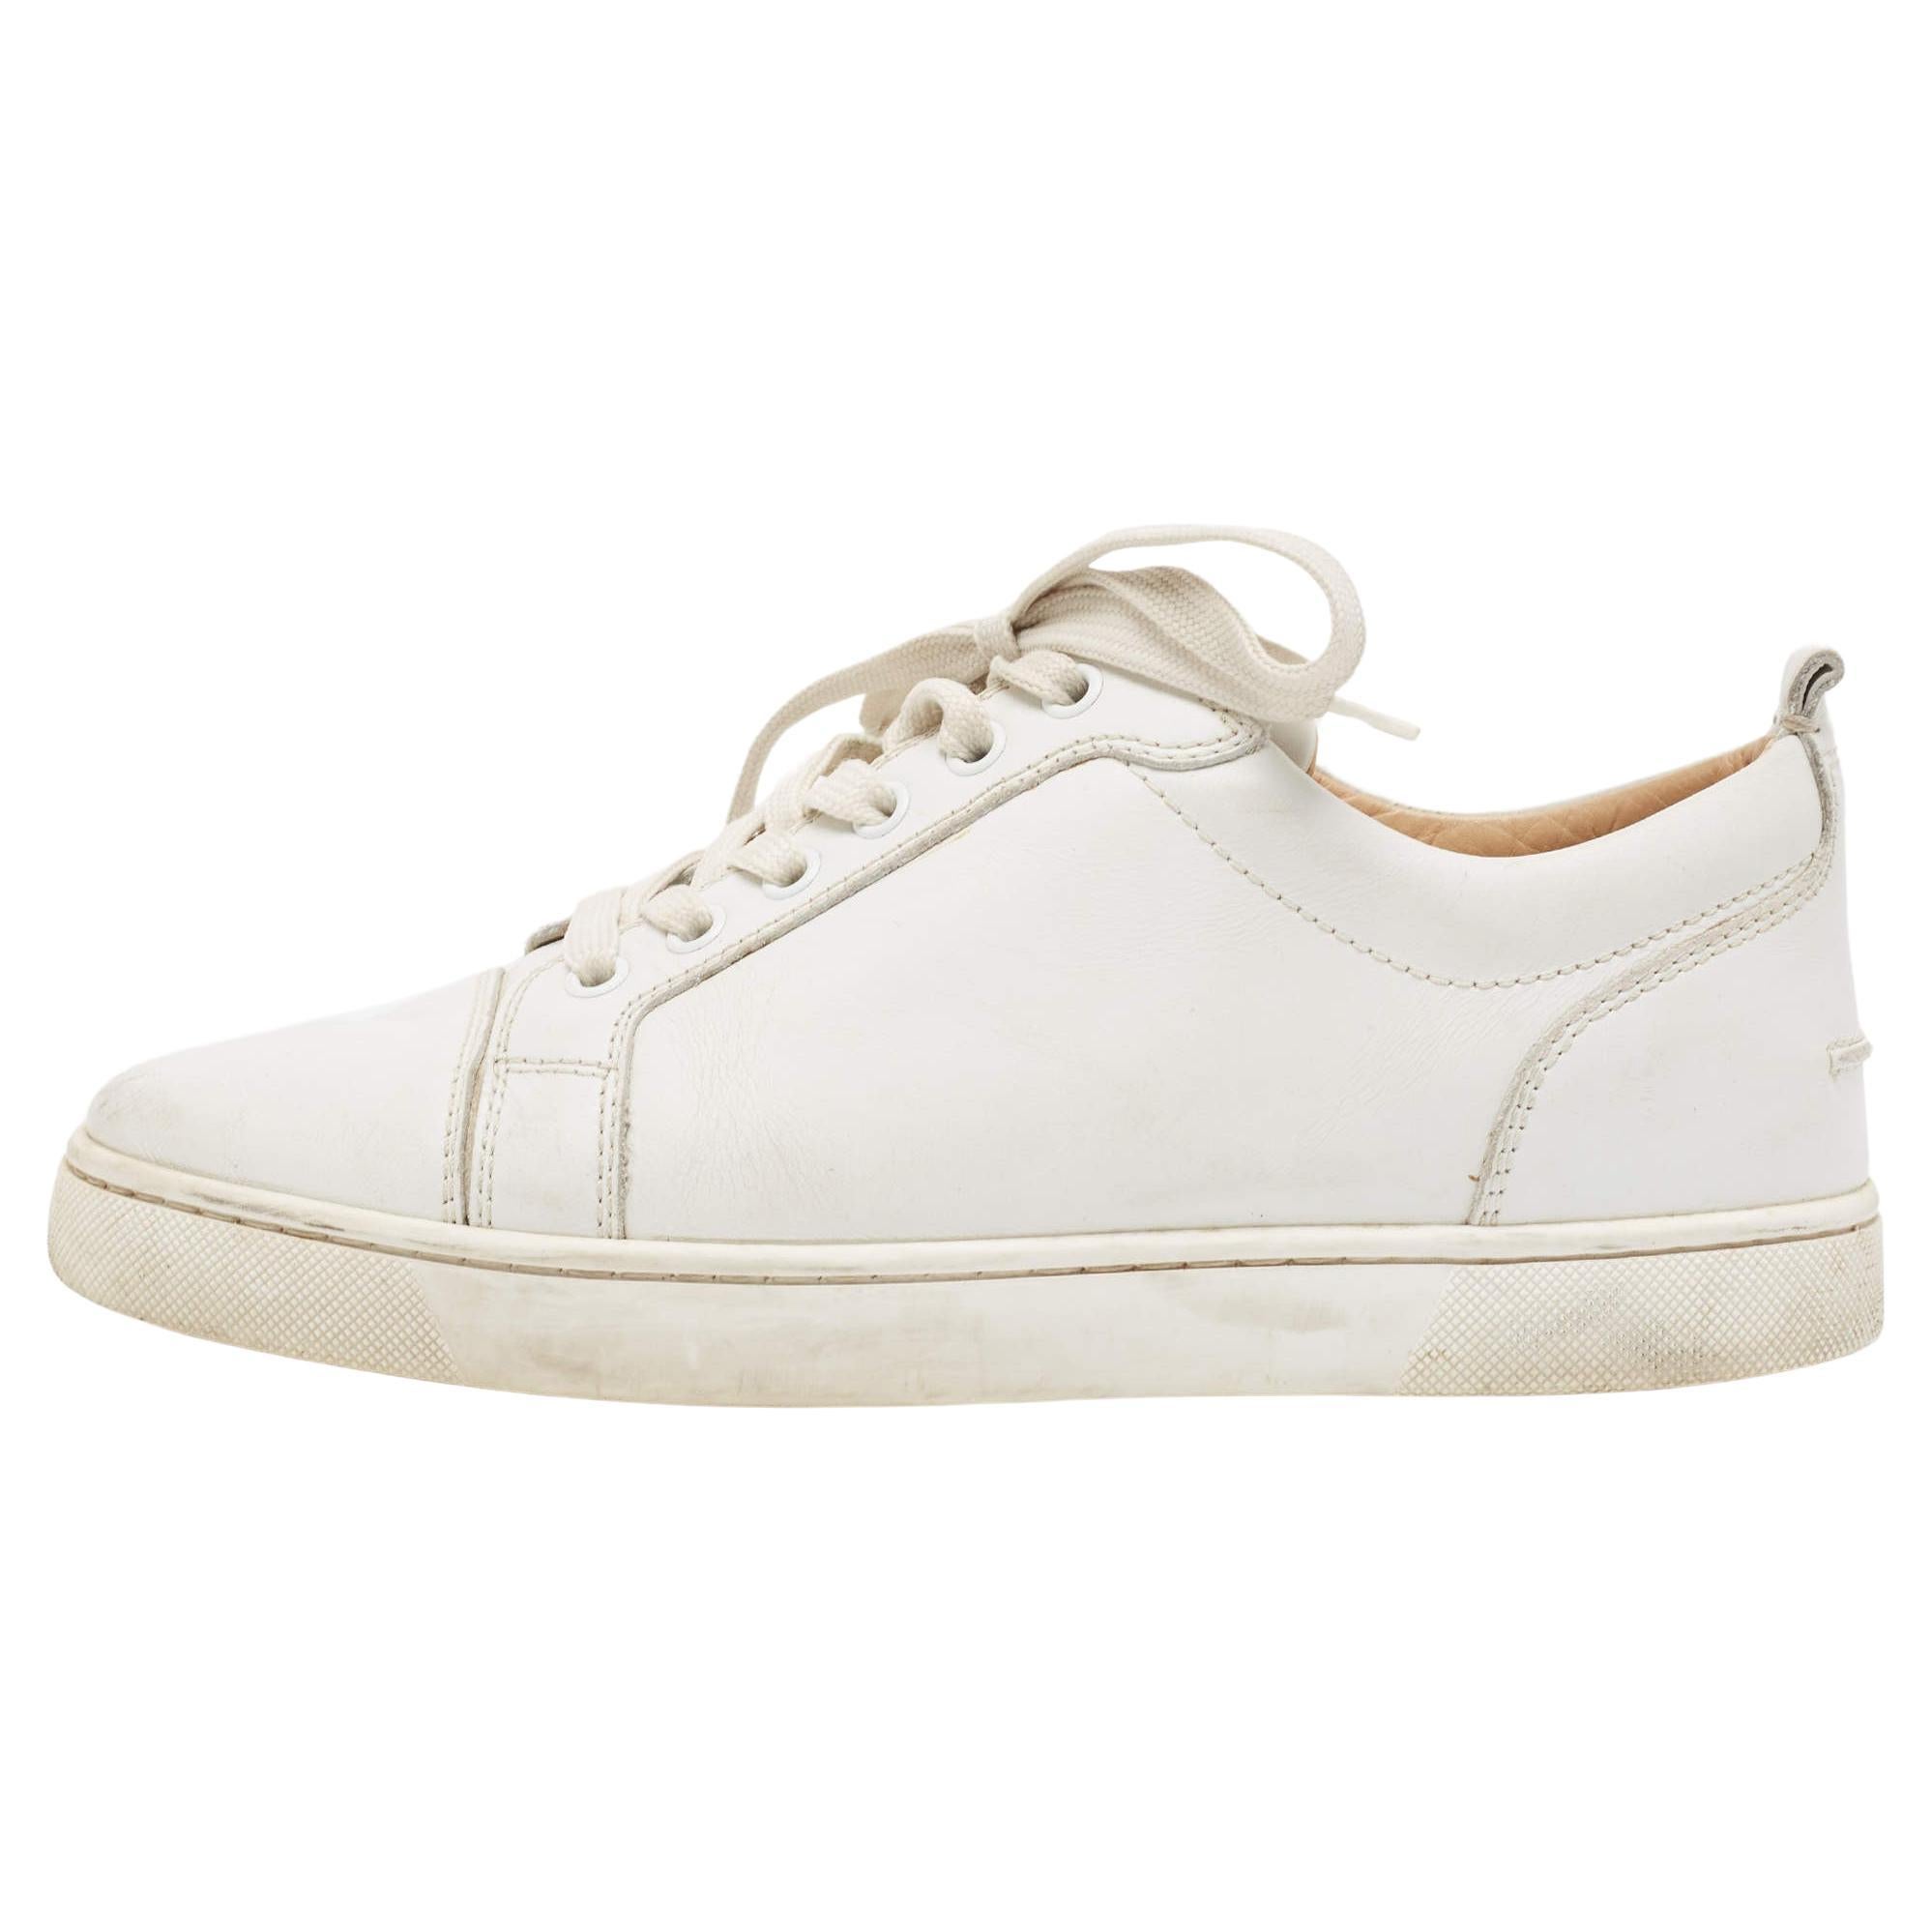 Christian Louboutin White Leather Vieira Low Top Sneakers Size 39 For Sale